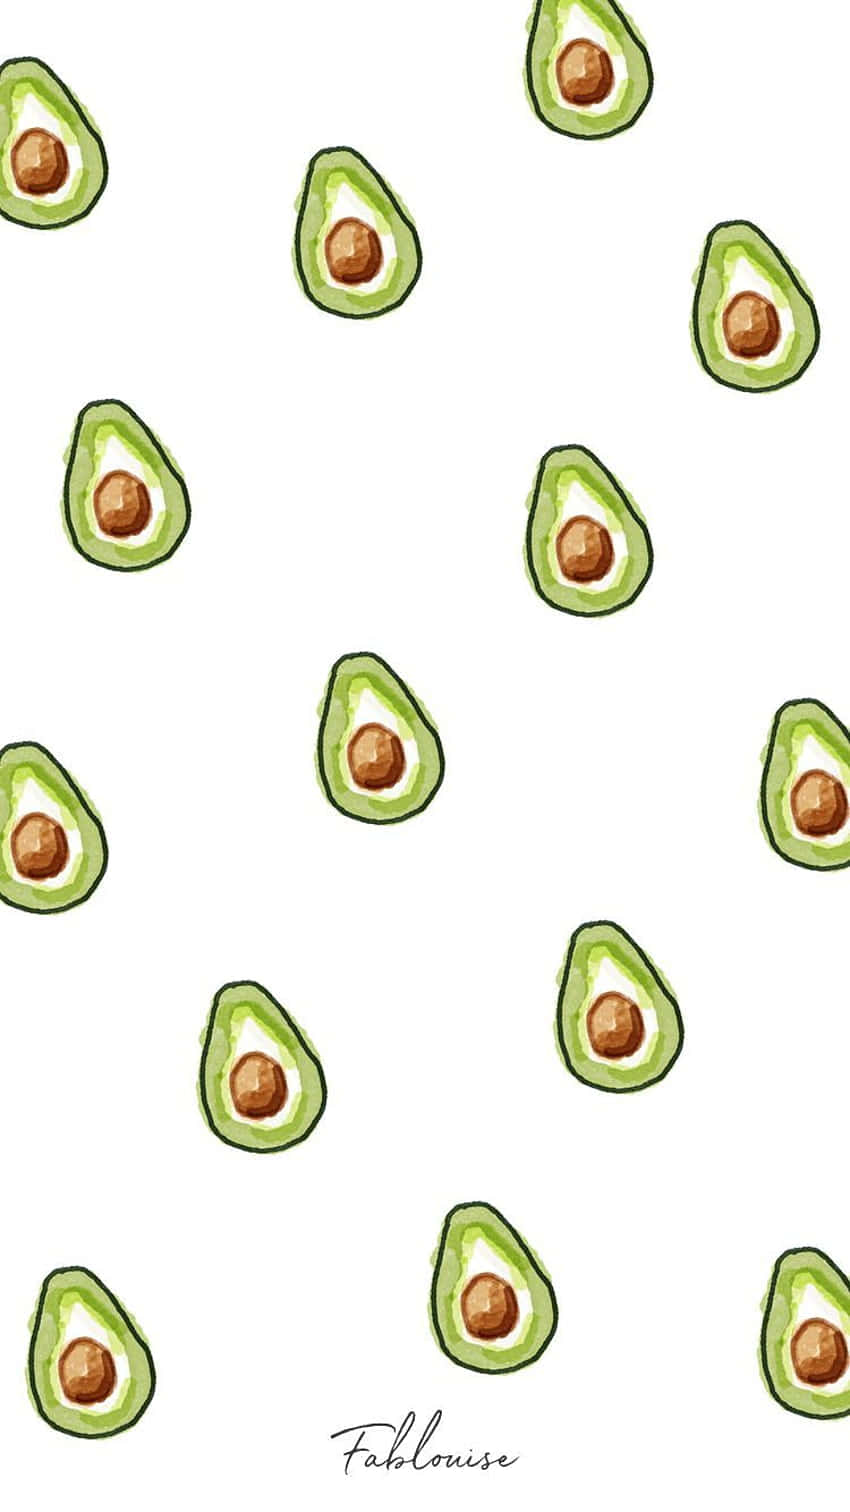 Avocado Iphone With Diagonal Patterns Wallpaper